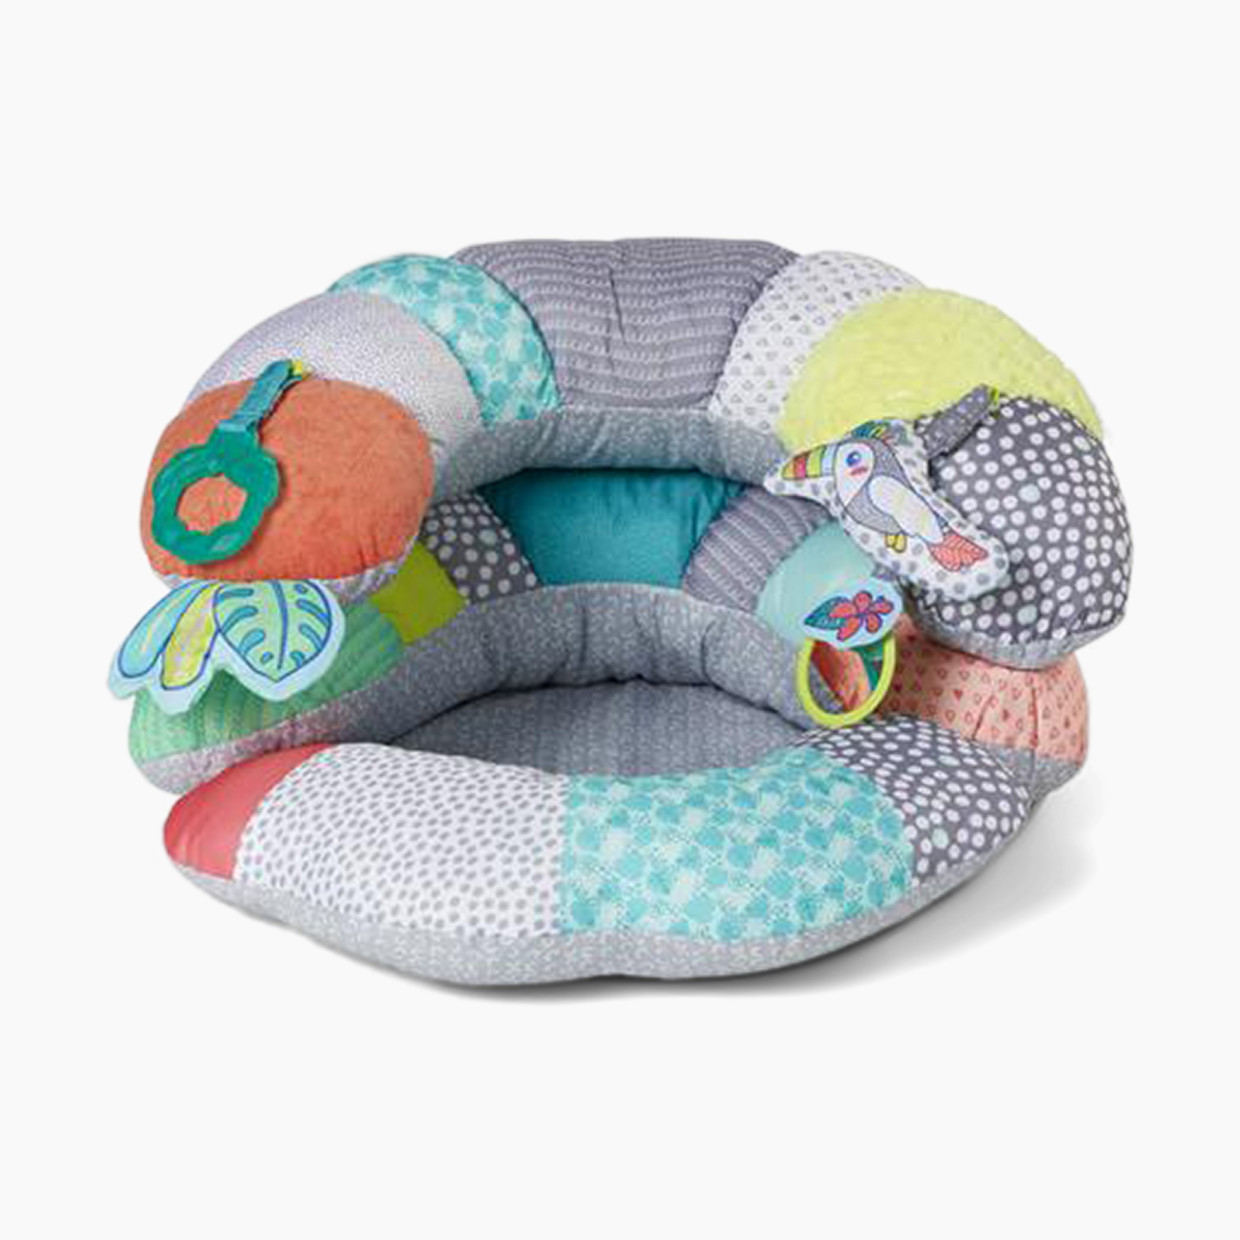 Infantino 2-In-1 Tummy Time & Seated Support - Toucan.